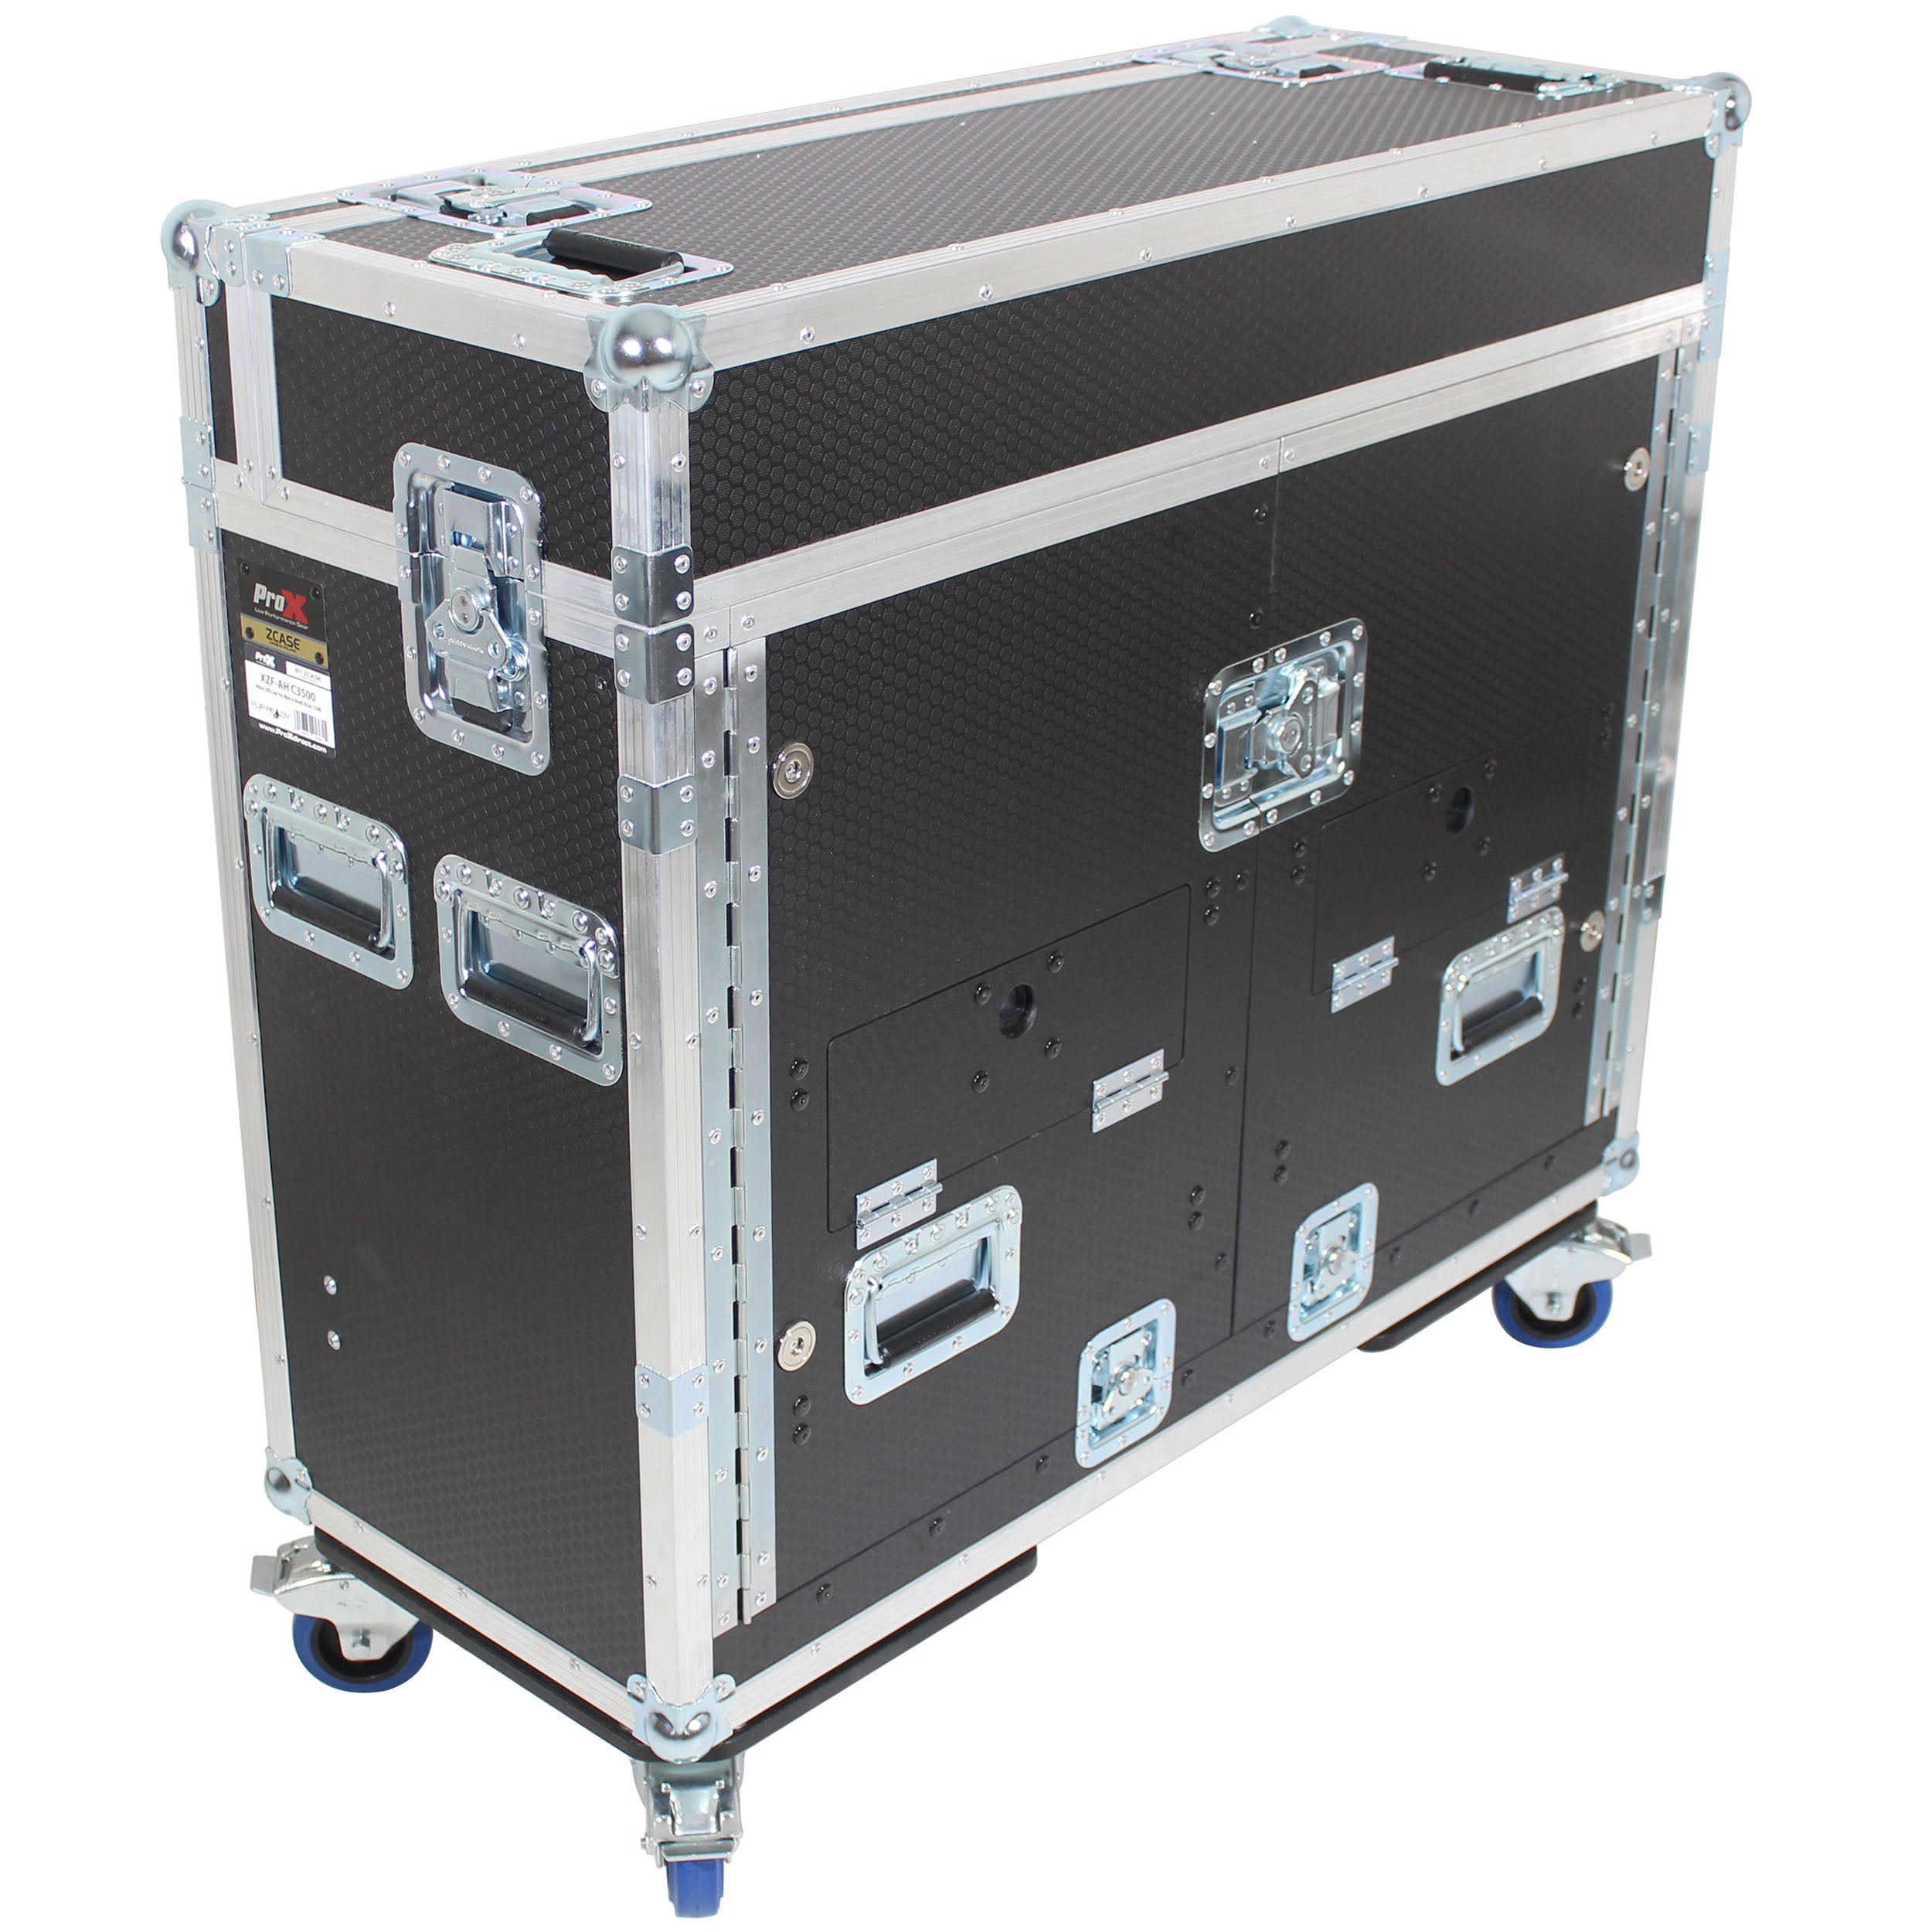 Pro X Flip-Ready Easy Retracting Hydraulic Lift Case for Allen and Heath DLive C3500 Console by ZCase XZF-AHC3500 LMA